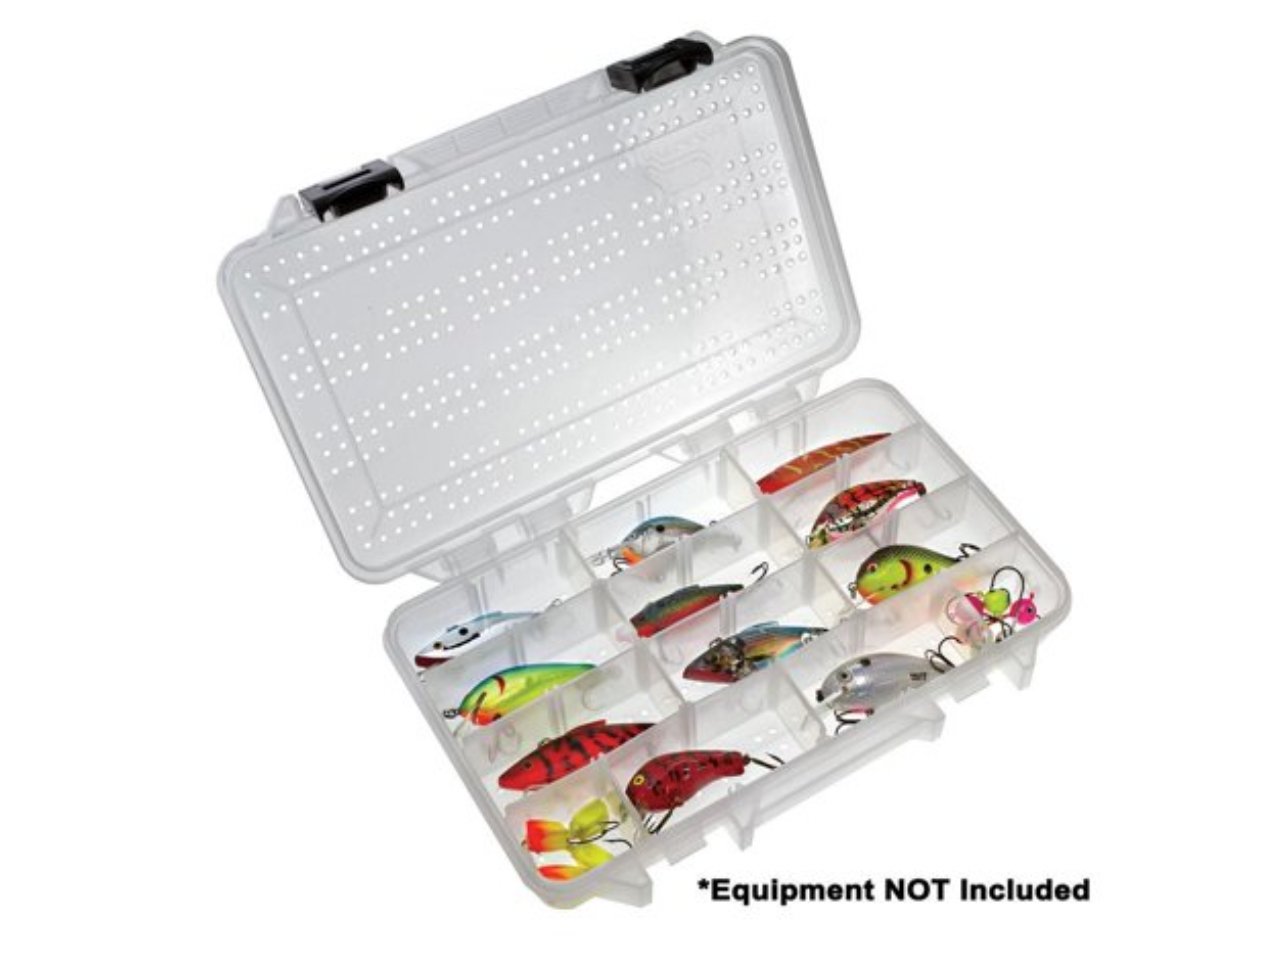 Organizer Rapala for балансиров XL. SKU: riloxl Gelta Shimano bait case  storage bag fish box lure fishing tackle coils Convenient Lightweight  Durable Accessories Reliable high quality boat inventory organizer -  AliExpress